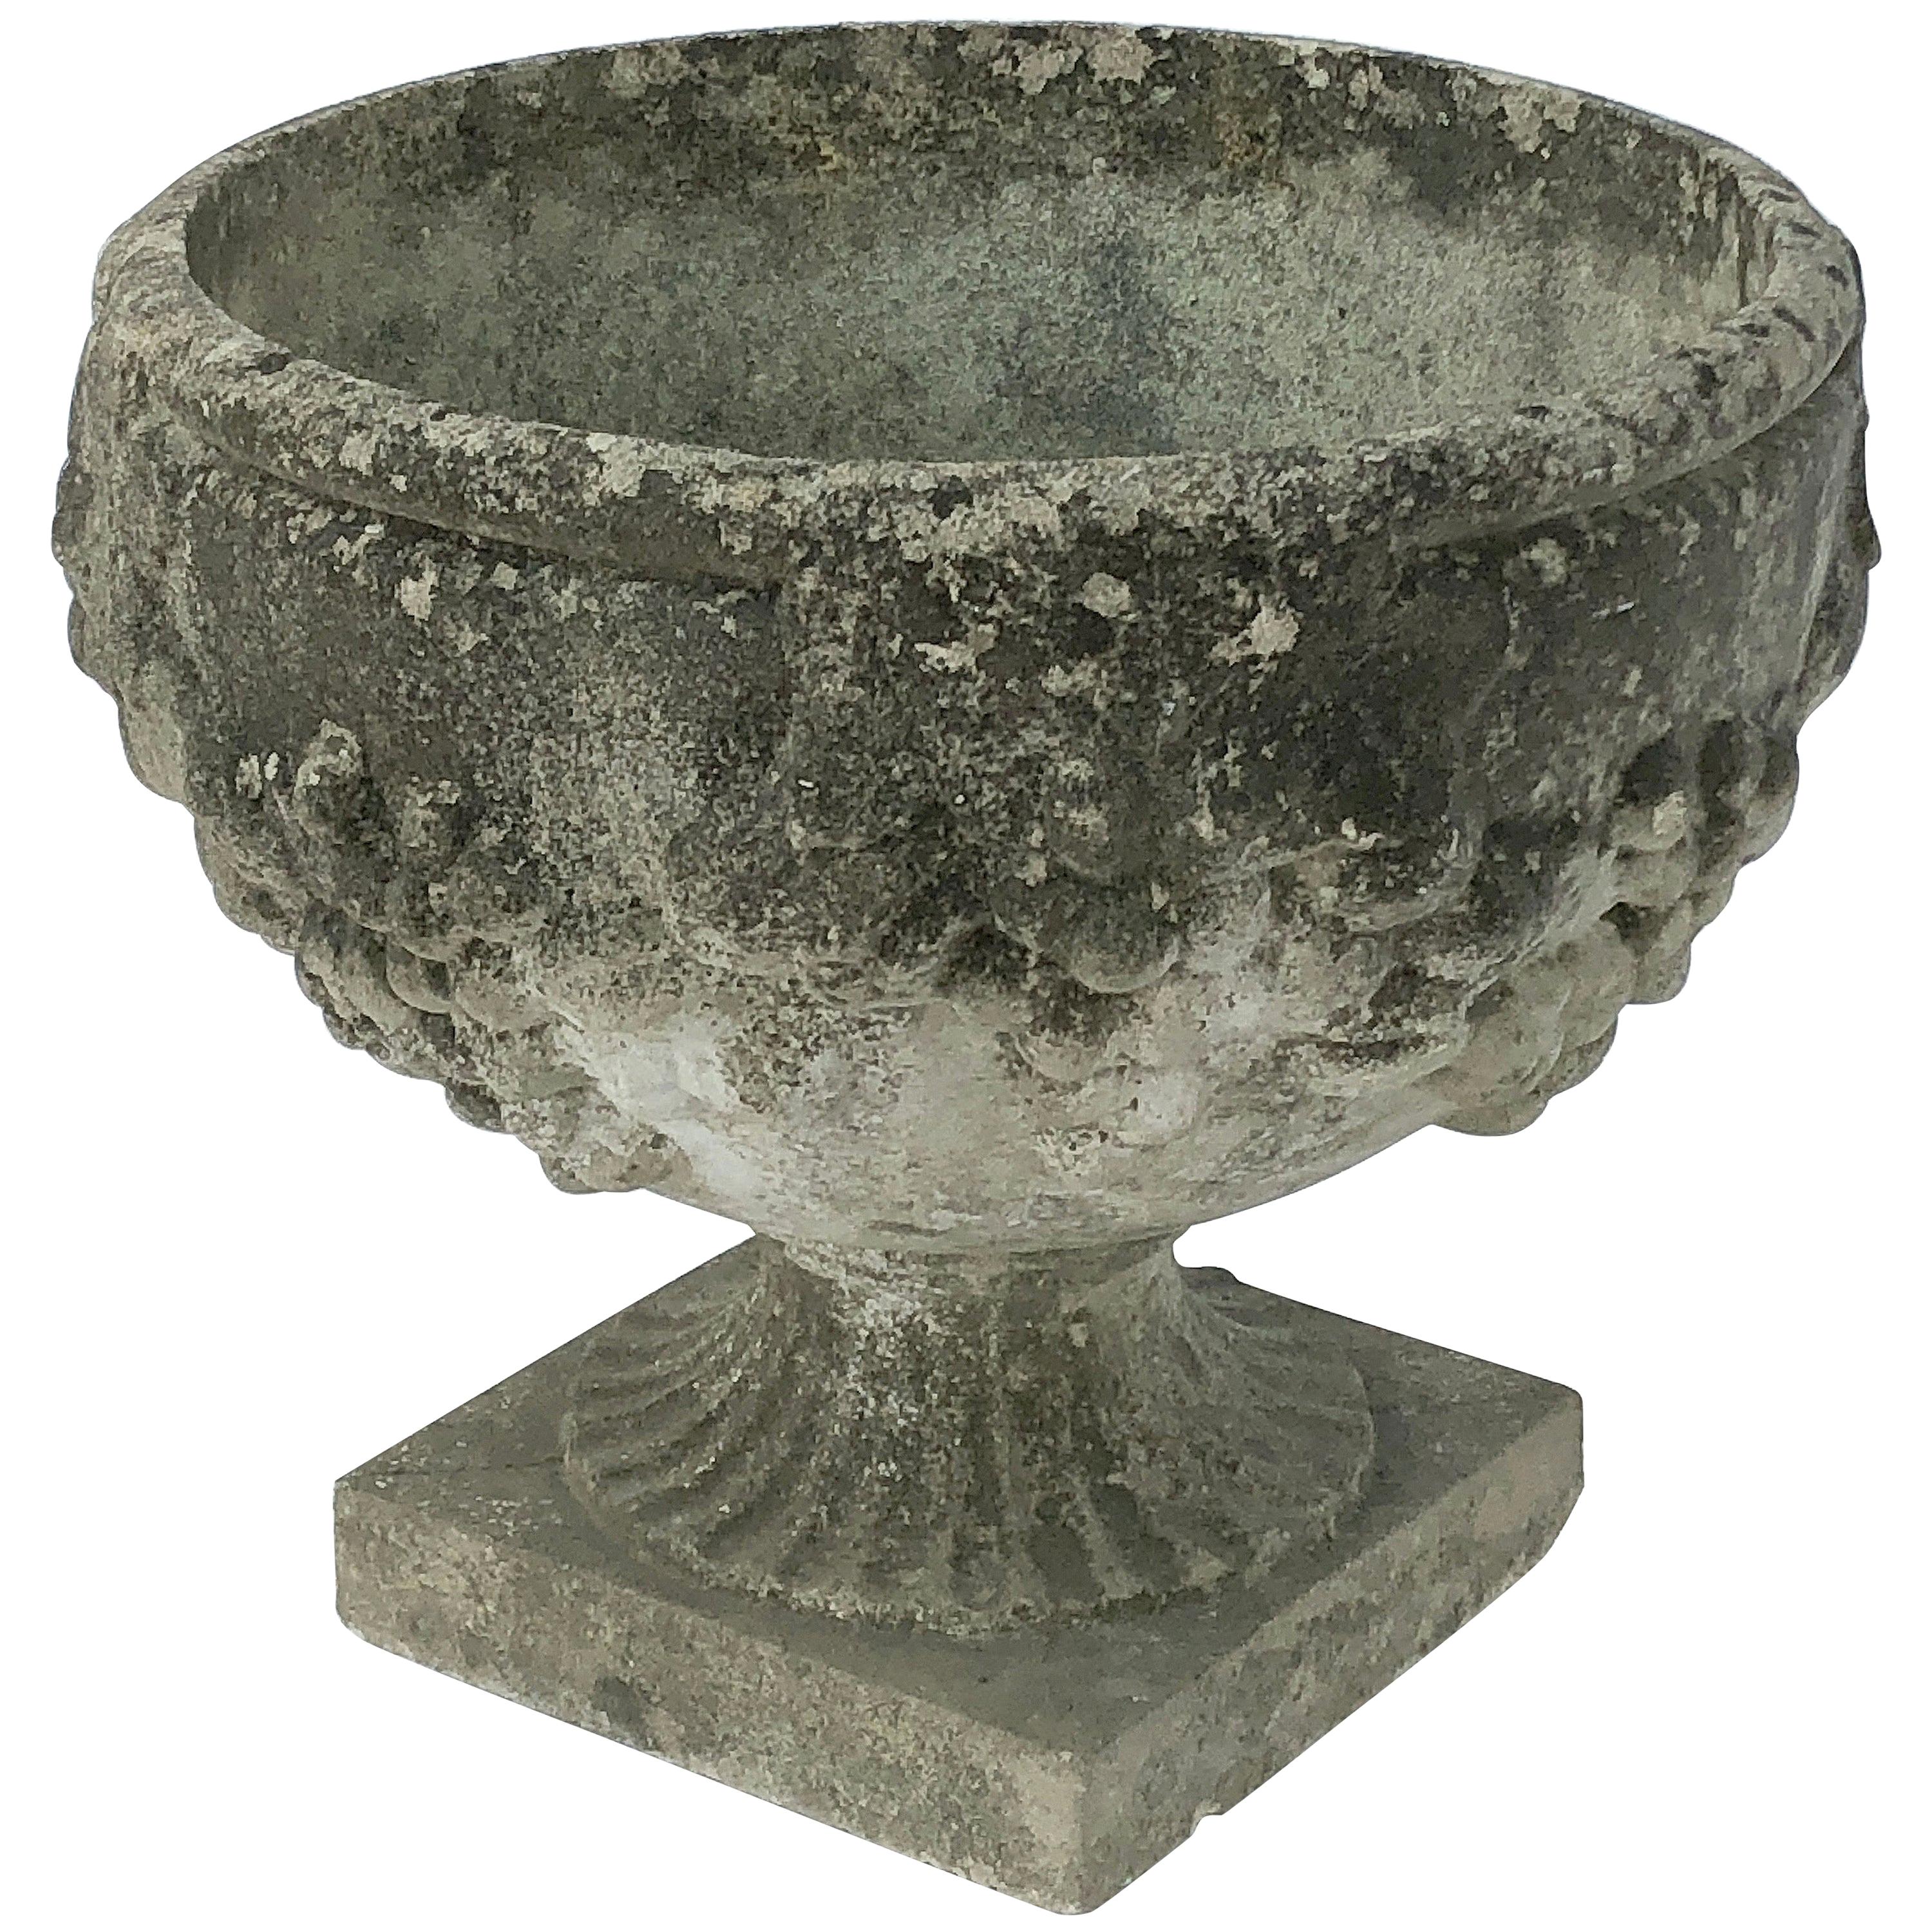 English Garden Stone Planter Pot or Urn with Relief of Grapes